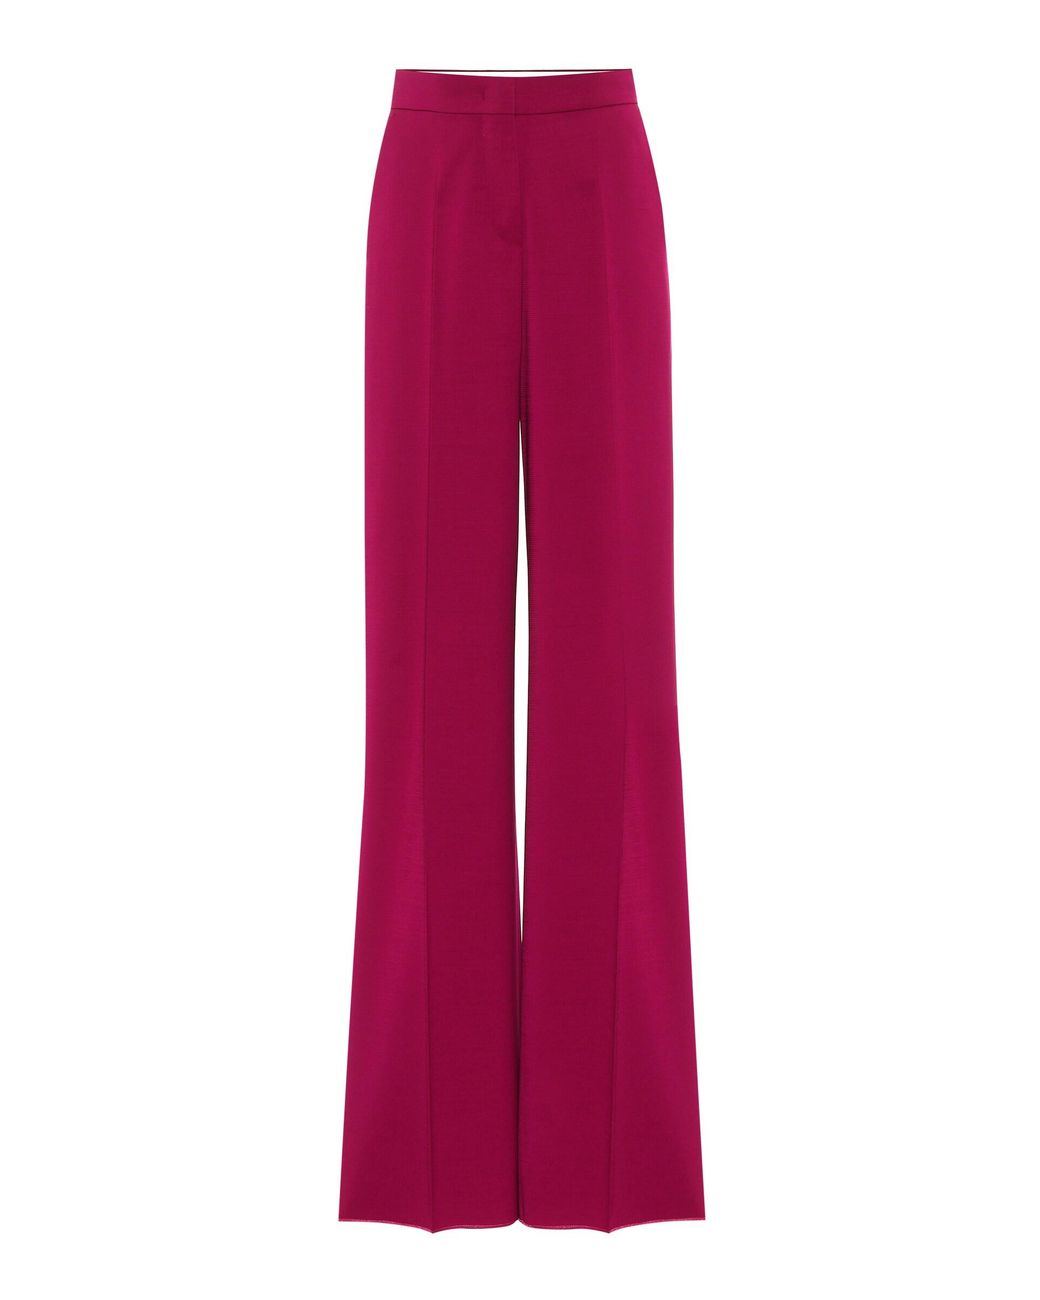 Max Mara Nebbia High-rise Wide-leg Pants in Red | Lyst